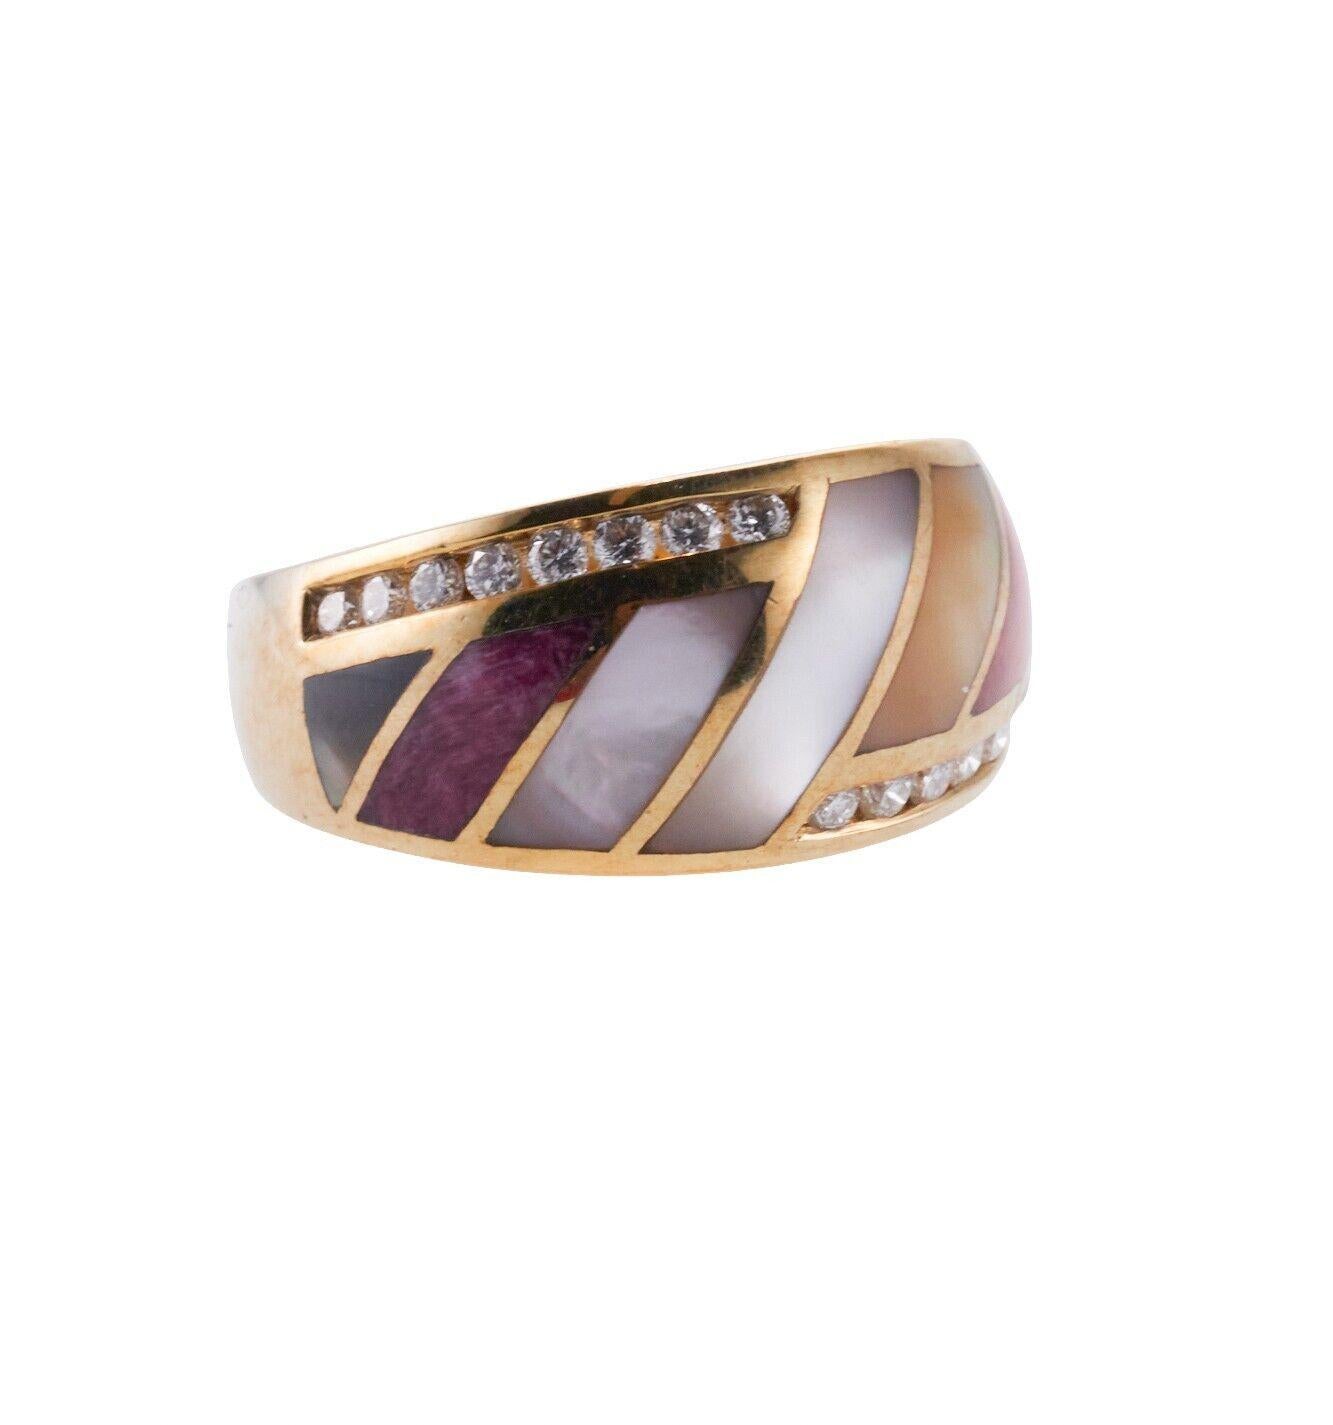 Asch Grossbardt Inlay Mother of Pearl Coral Diamond Gold Ring In Excellent Condition For Sale In Lambertville, NJ